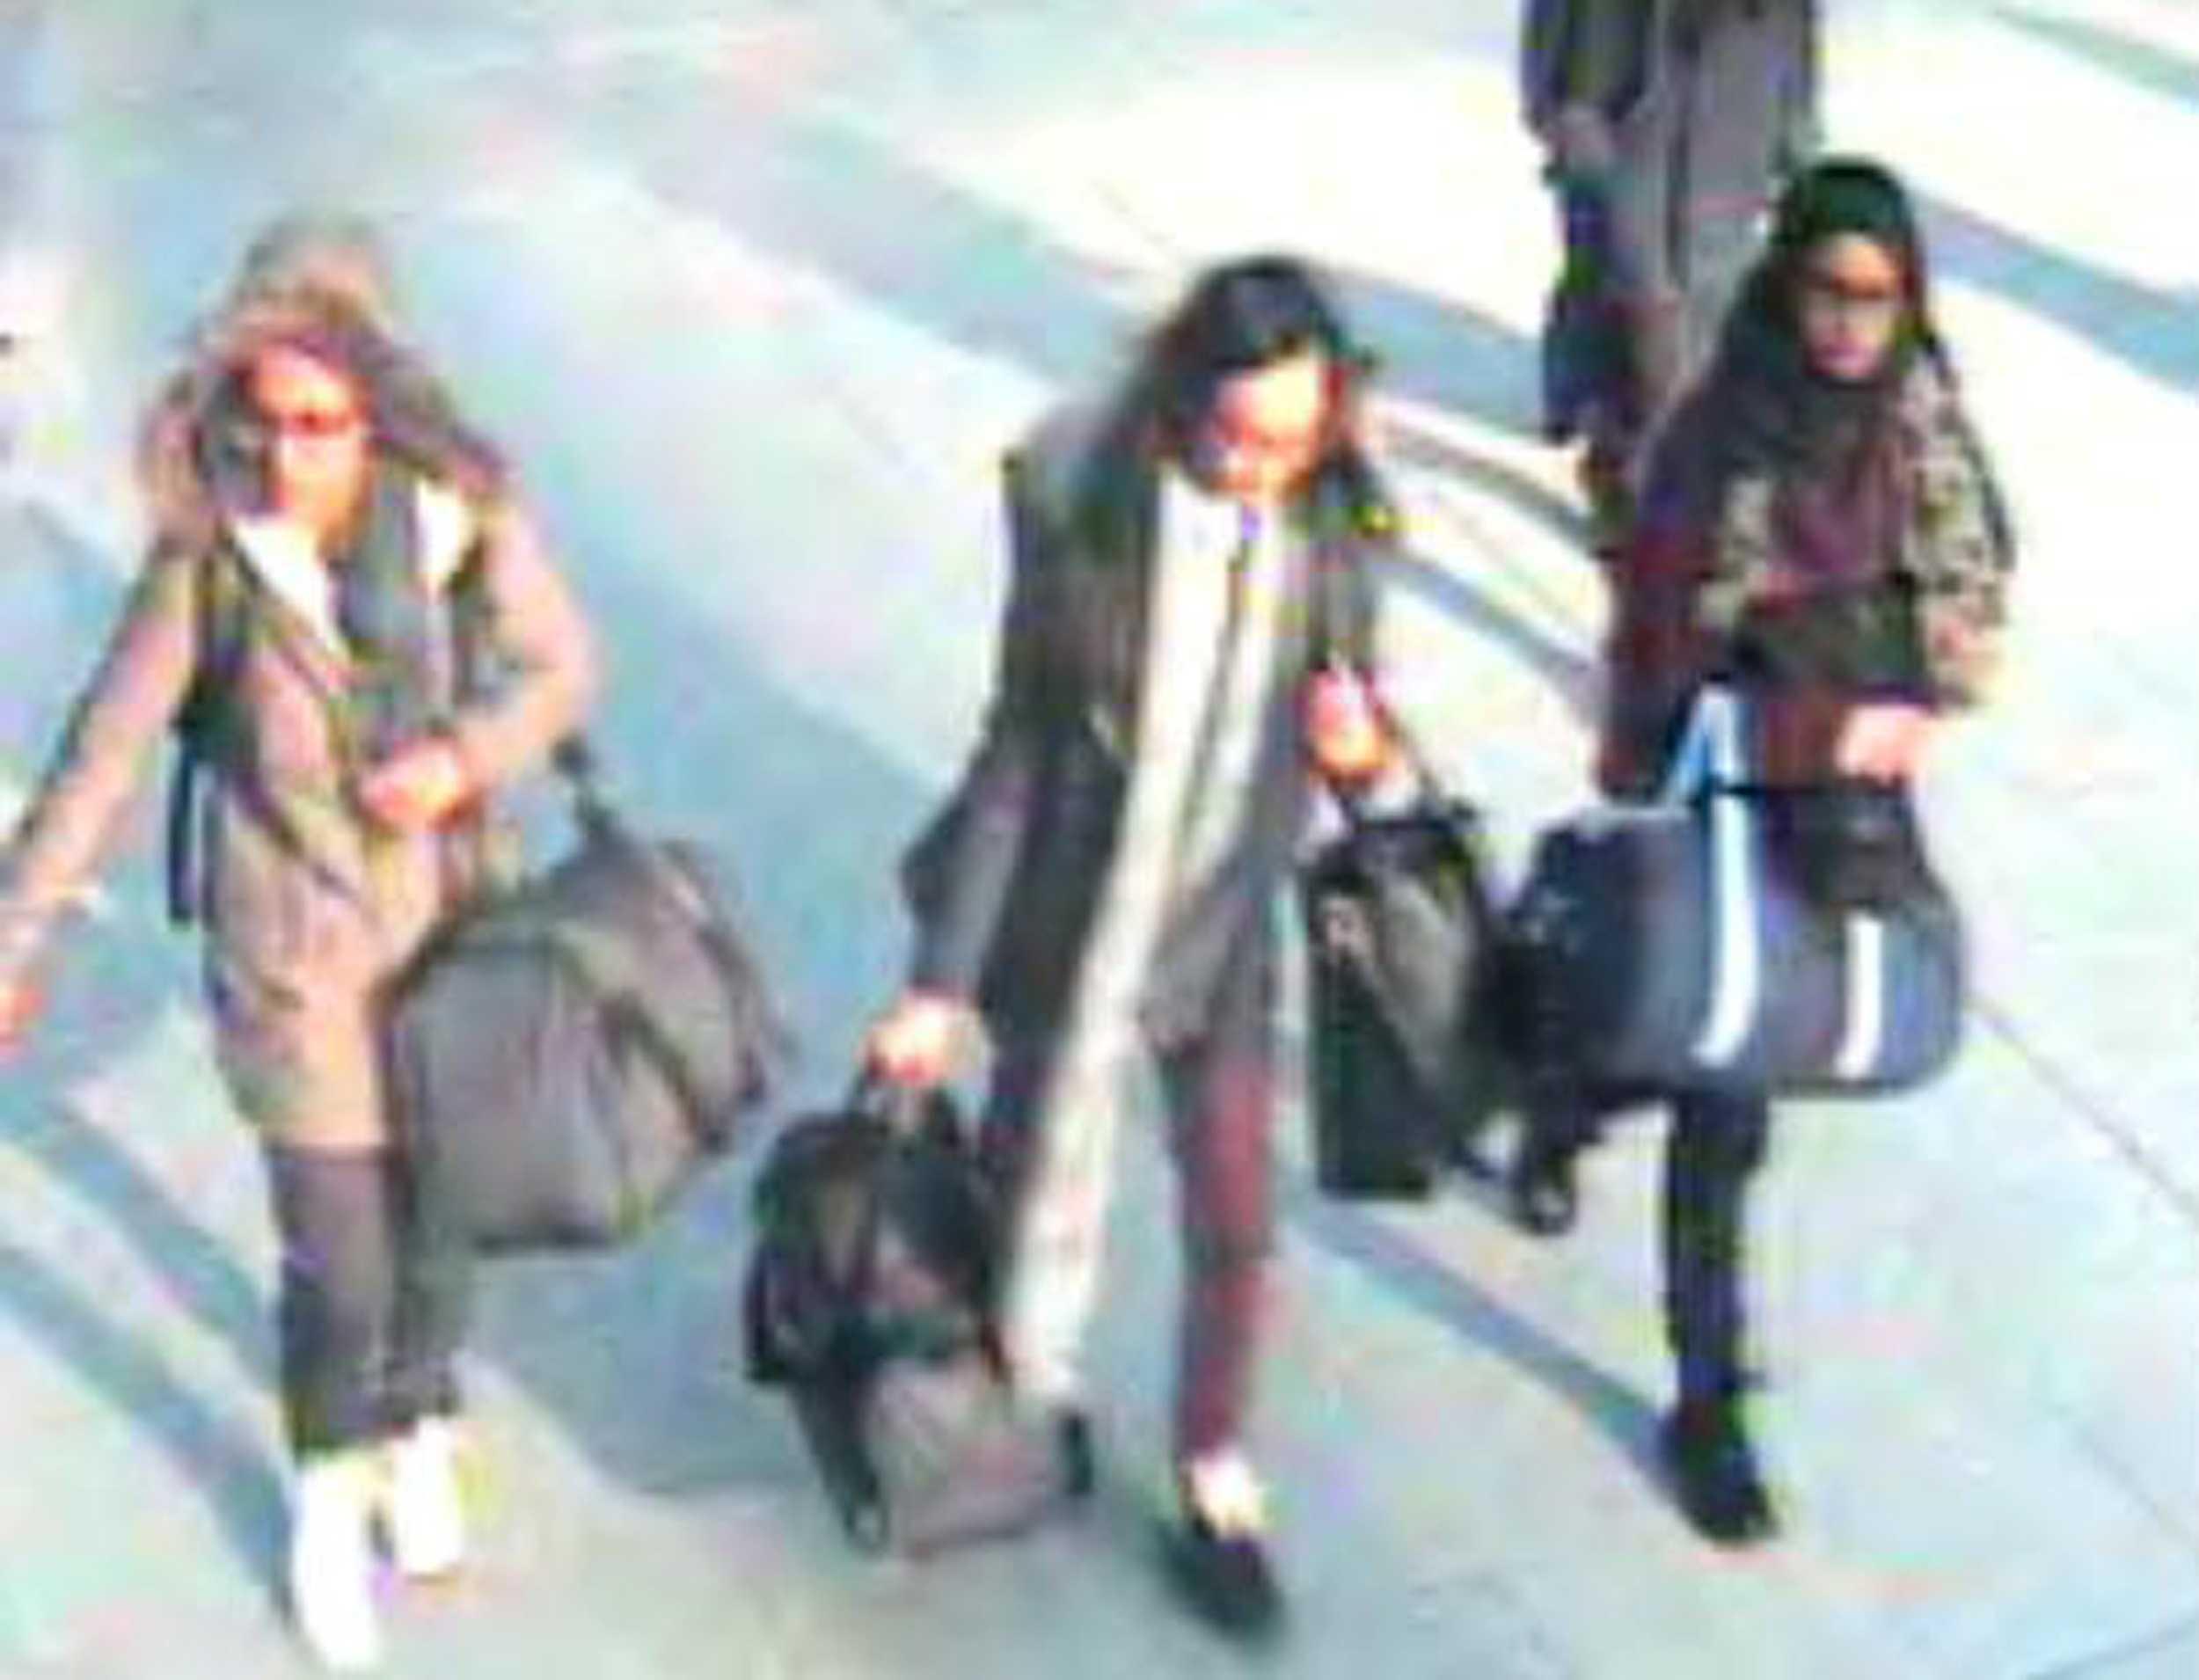 A handout CCTV picture received from the Metropolitan Police Service on Feb 23, 2015 shows (left to right) British teenagers Amira Abase, Kadiza Sultana and Shamima Begum walking with luggage at Gatwick Airport, south of London, on Feb 17, 2015. Photo: AFP